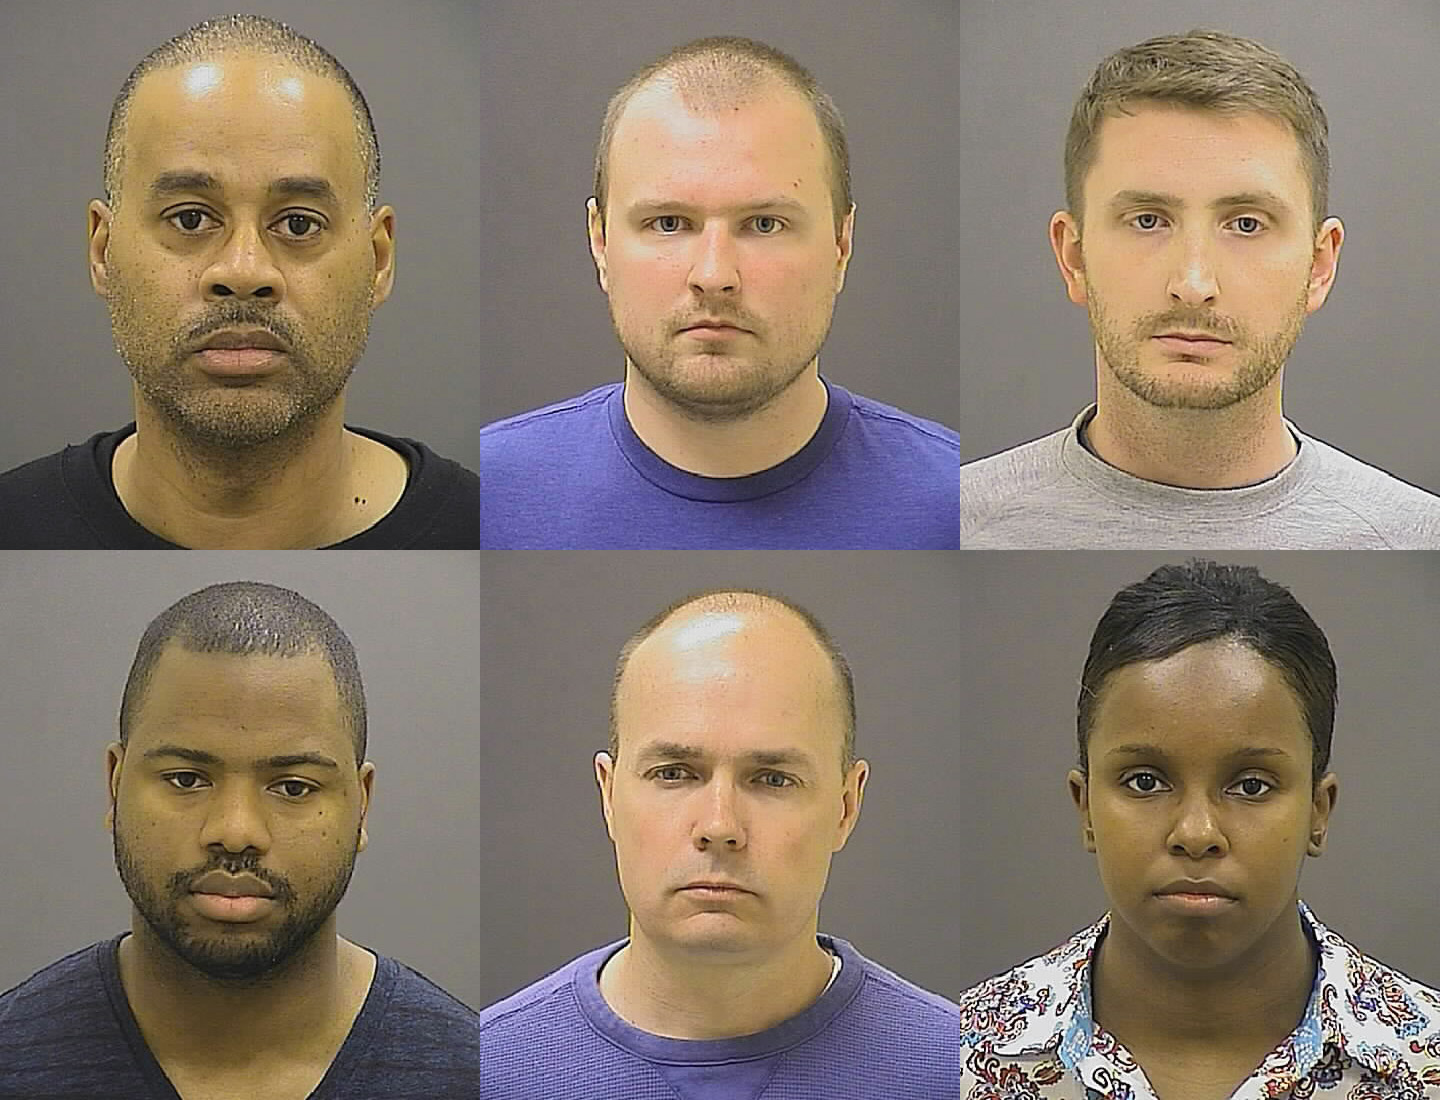 All trials of officers charged in Freddie Gray case put on hold